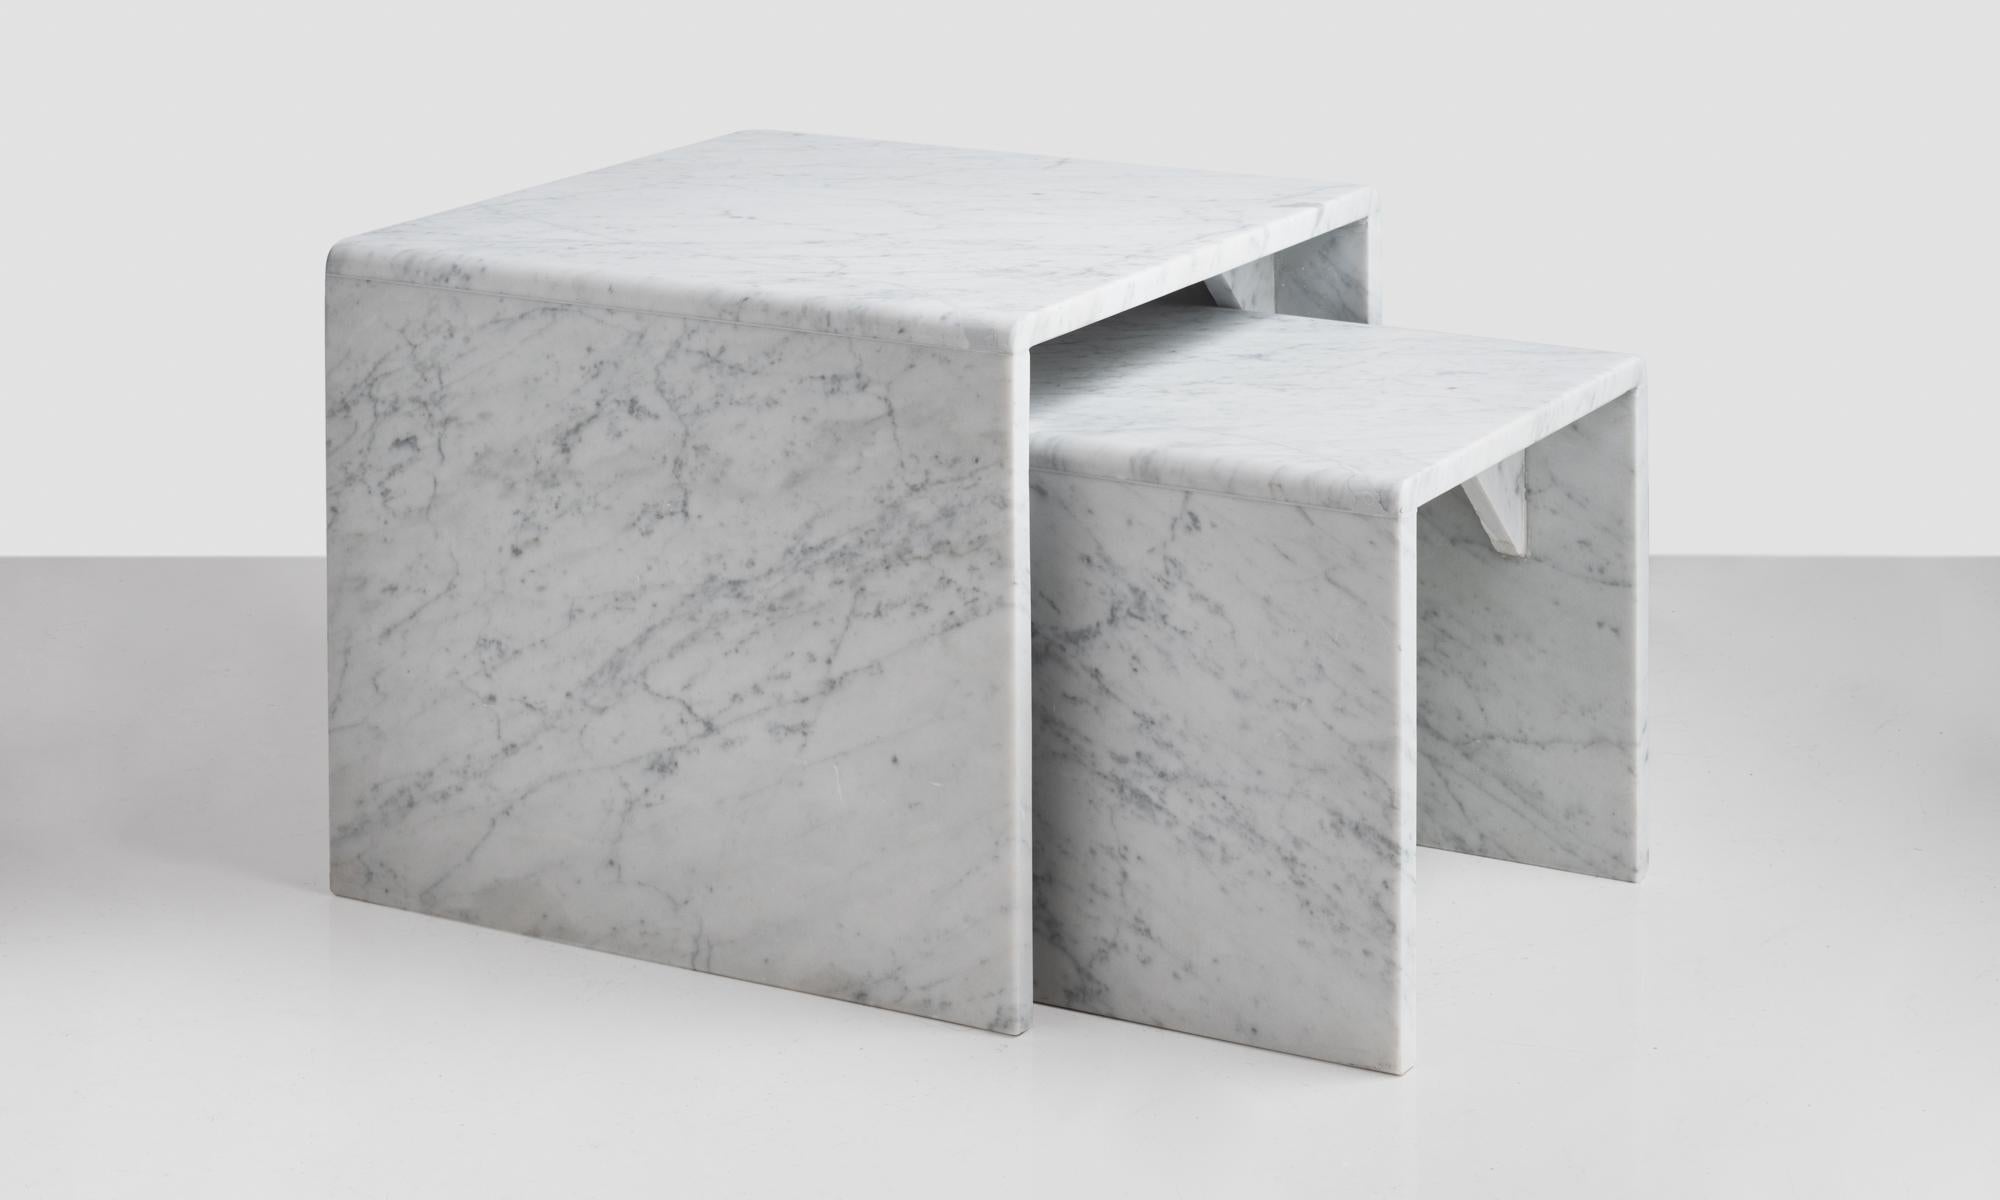 Marble nesting tables, Italy, circa 1960.

Elegant geometric forms in beautifully patinated marble.

Measures: 19.75